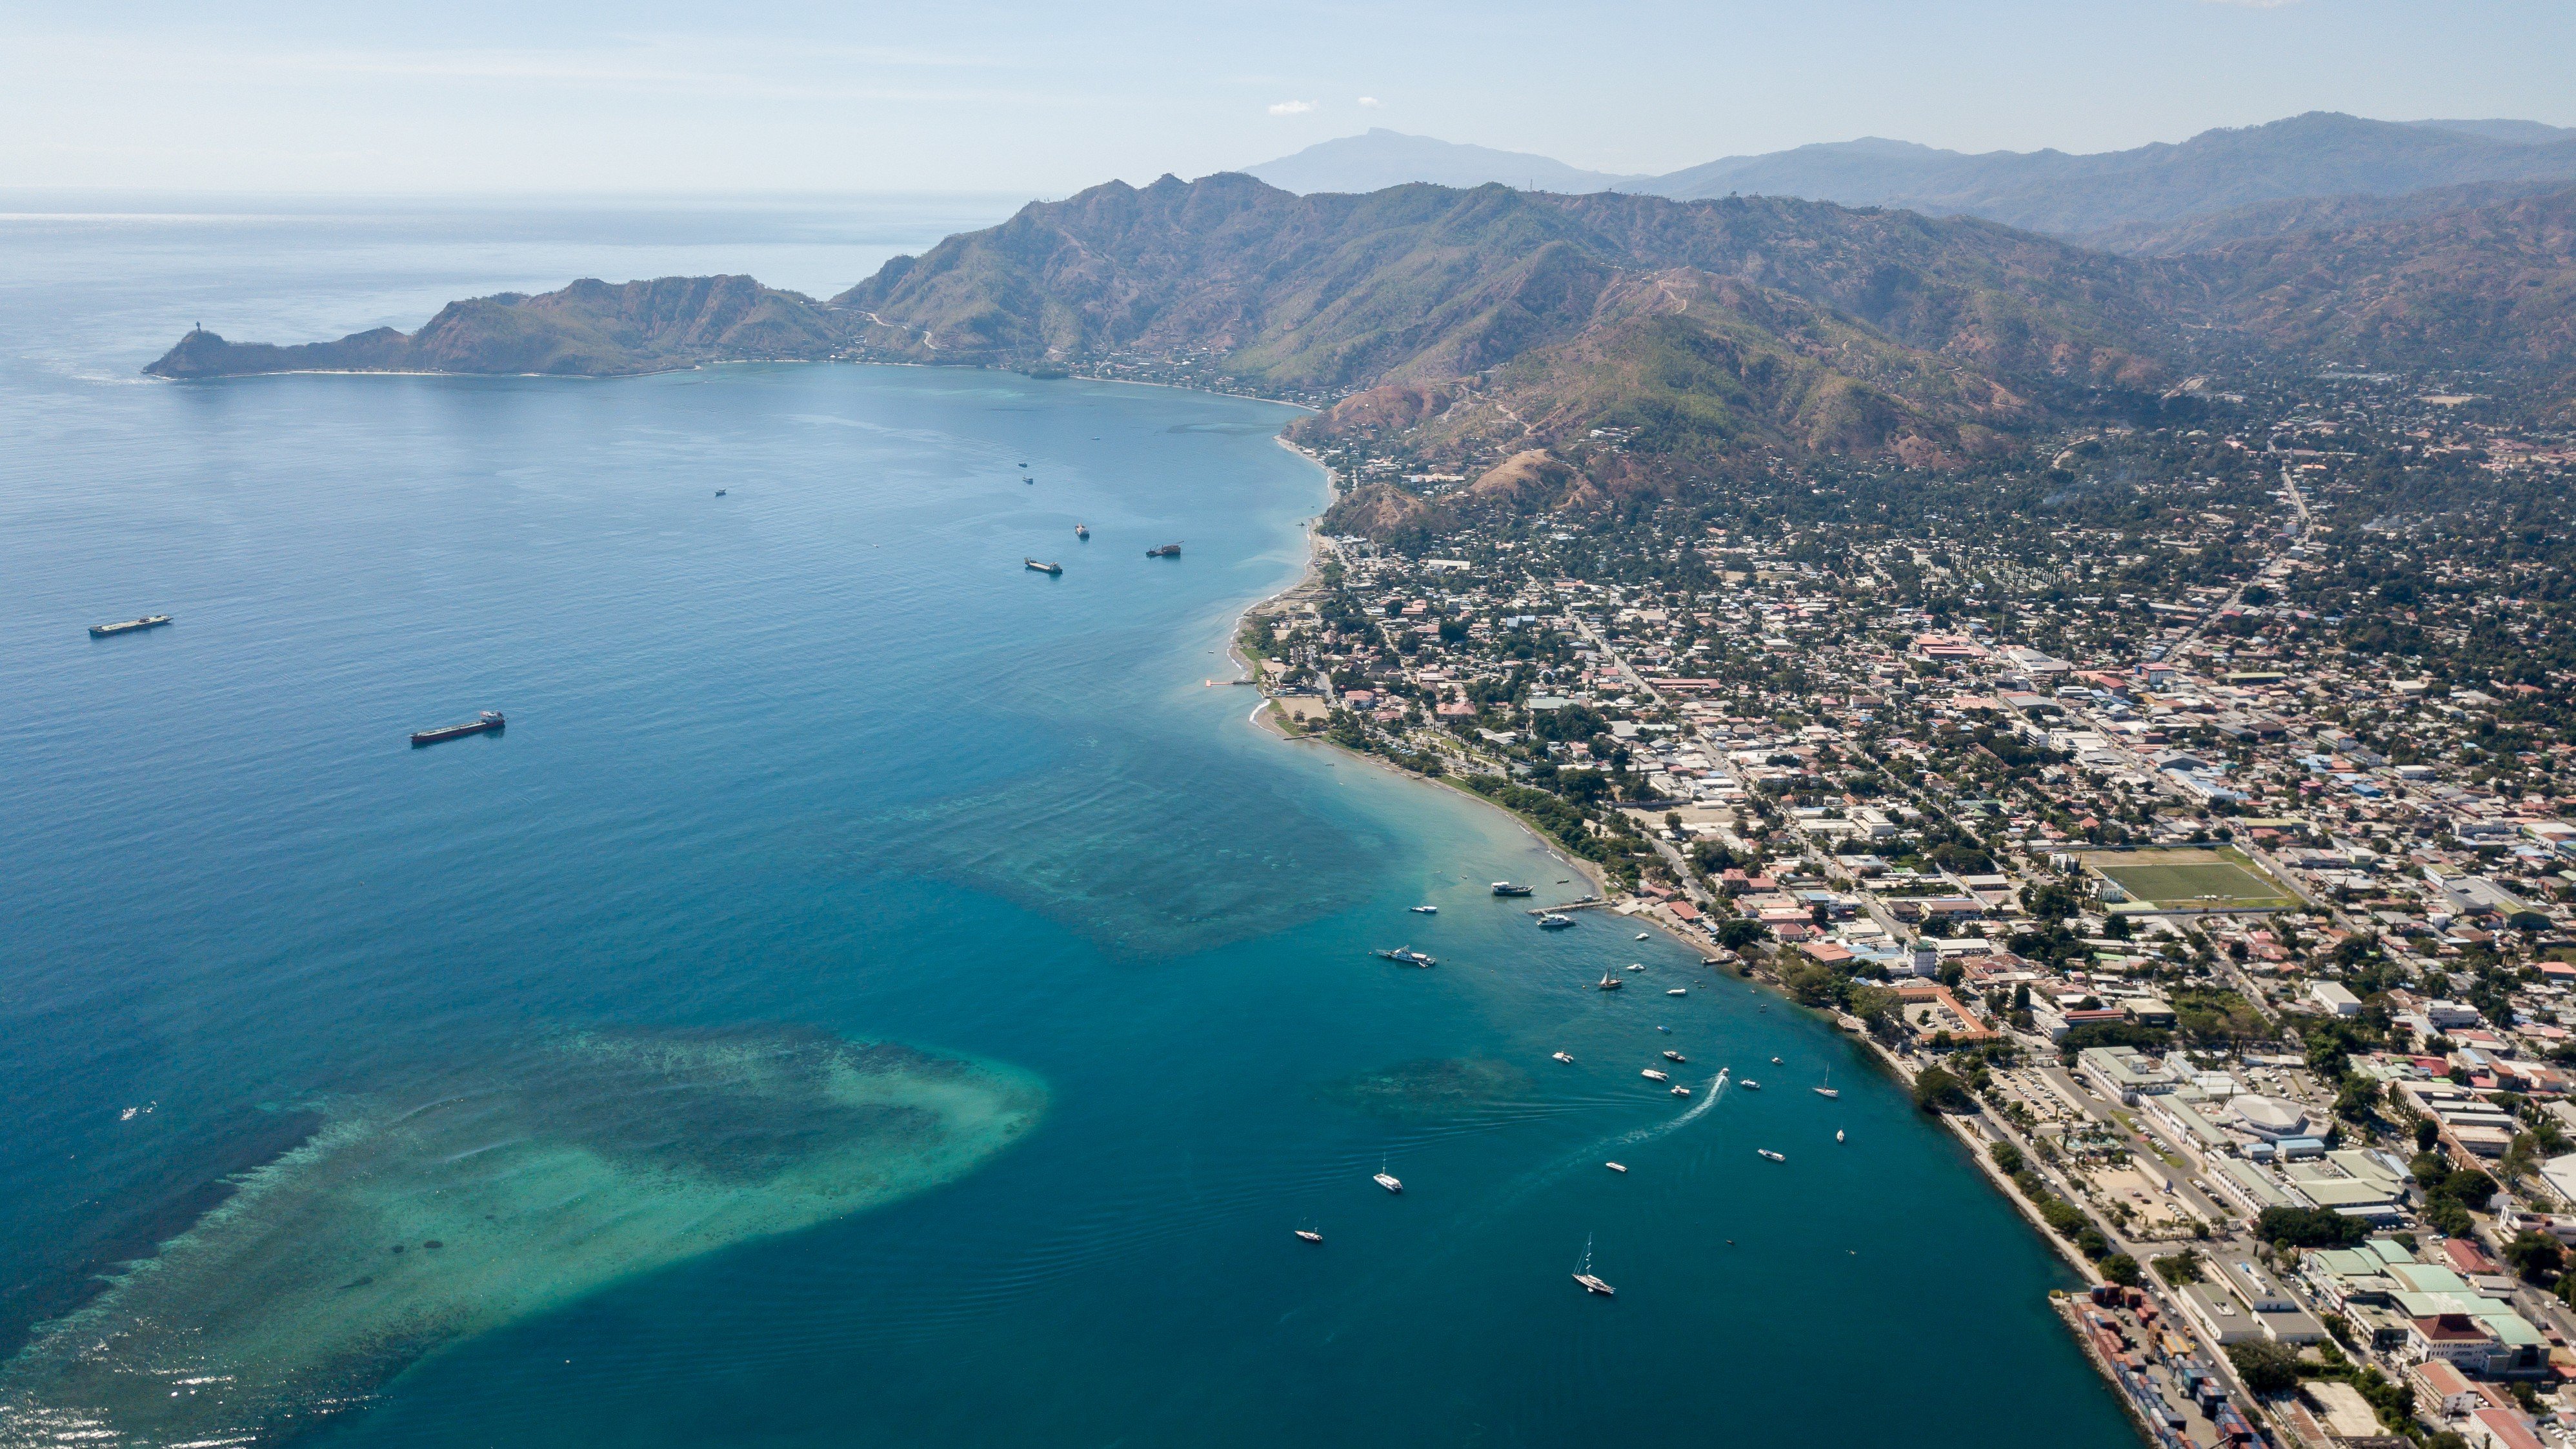 Dili, capital of East Timor. China has backed a major infrastructure drive in the country of 1.3 million people. Photo: Shutterstock